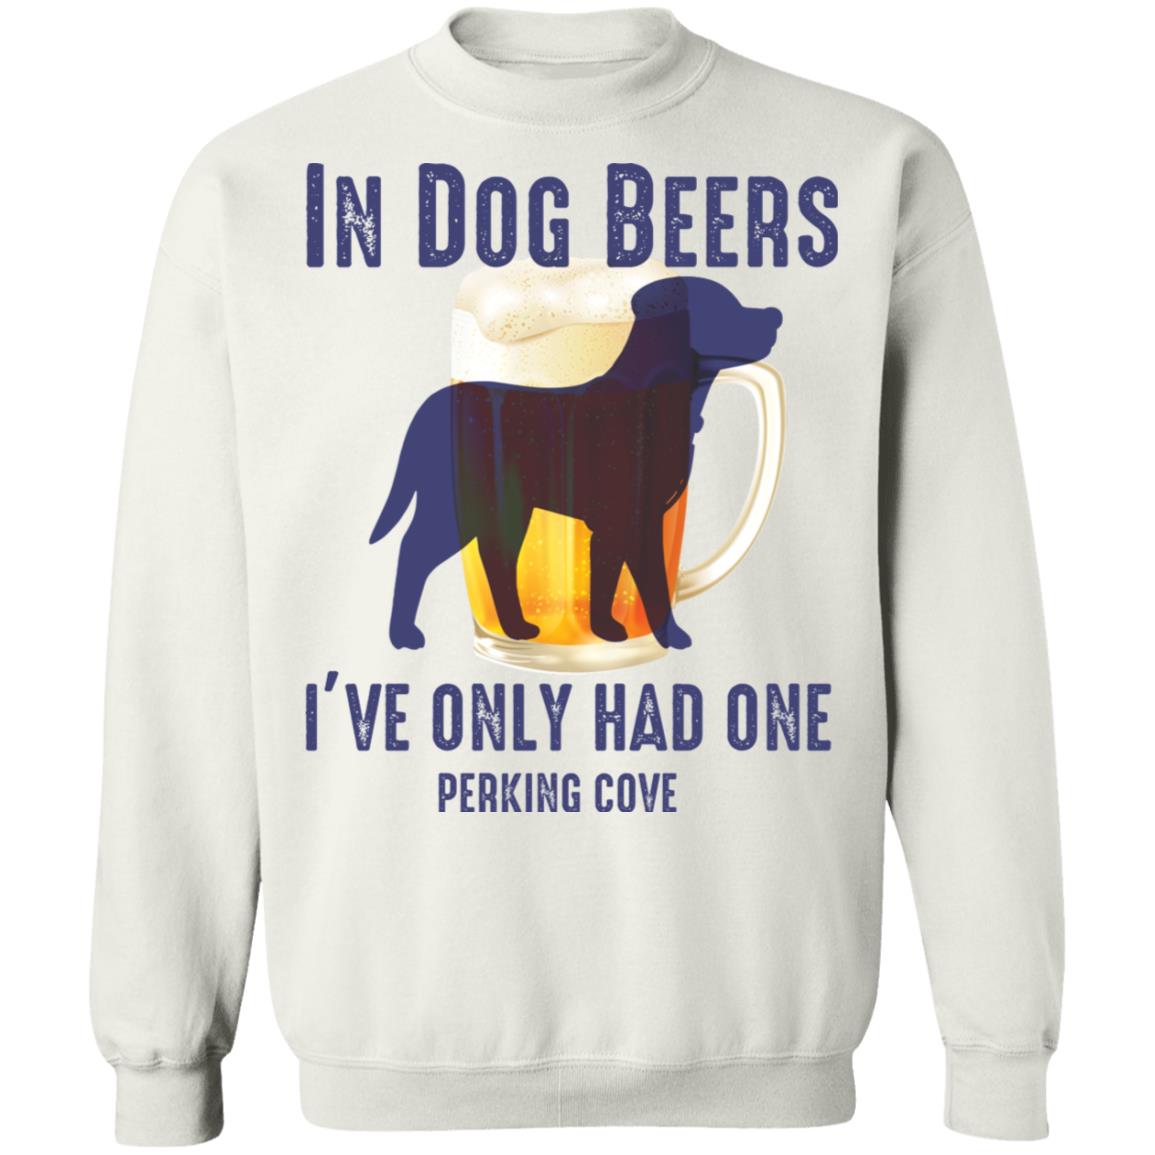 In Dog Beers I’ve Only Had One Perking Cove Shirt 2